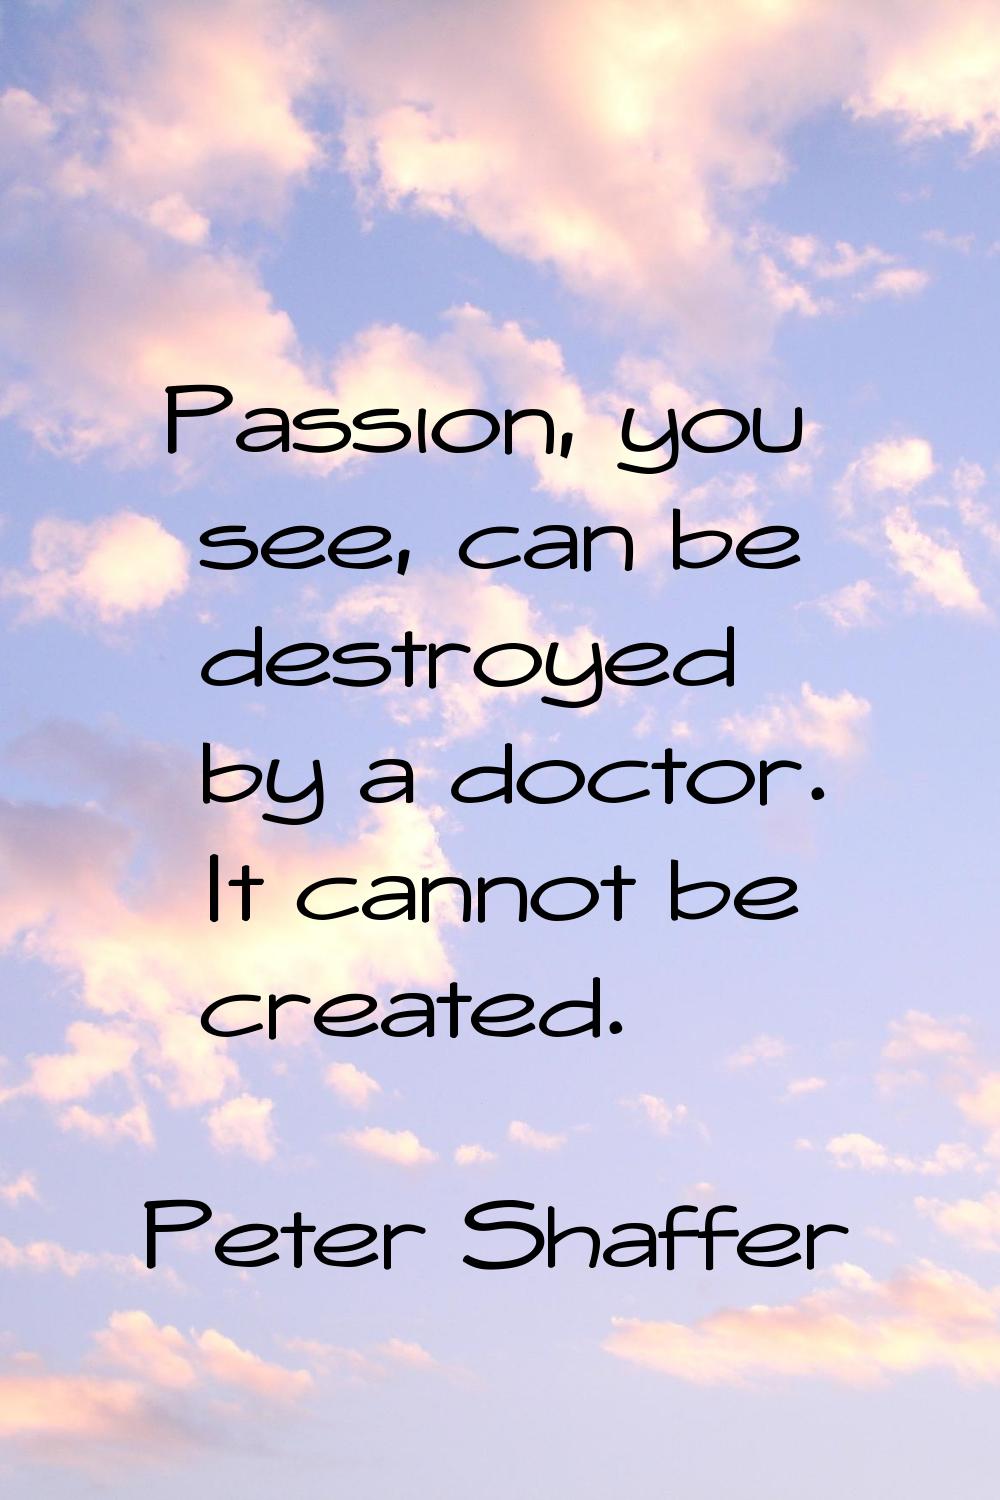 Passion, you see, can be destroyed by a doctor. It cannot be created.